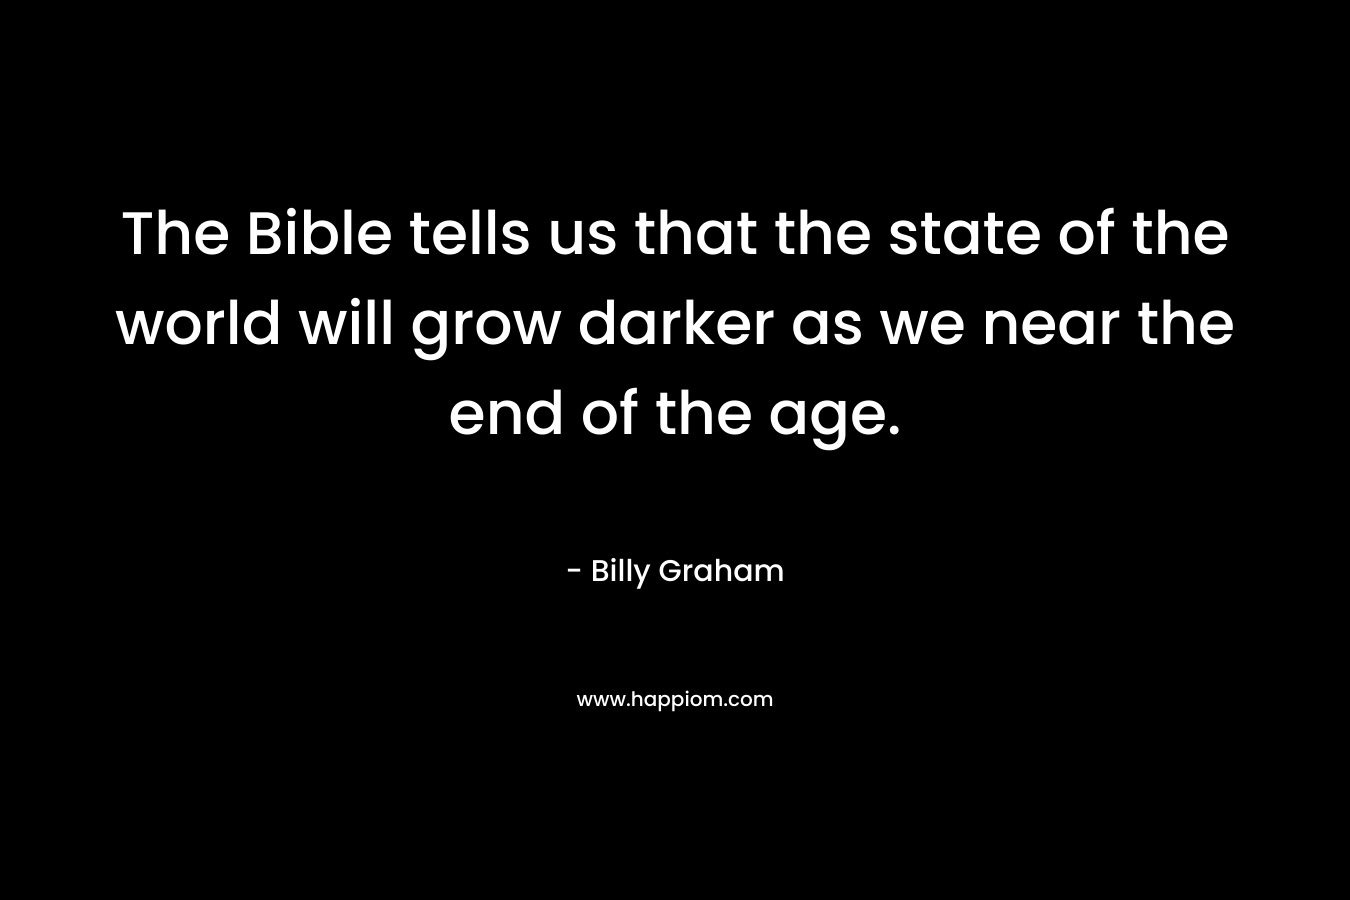 The Bible tells us that the state of the world will grow darker as we near the end of the age.